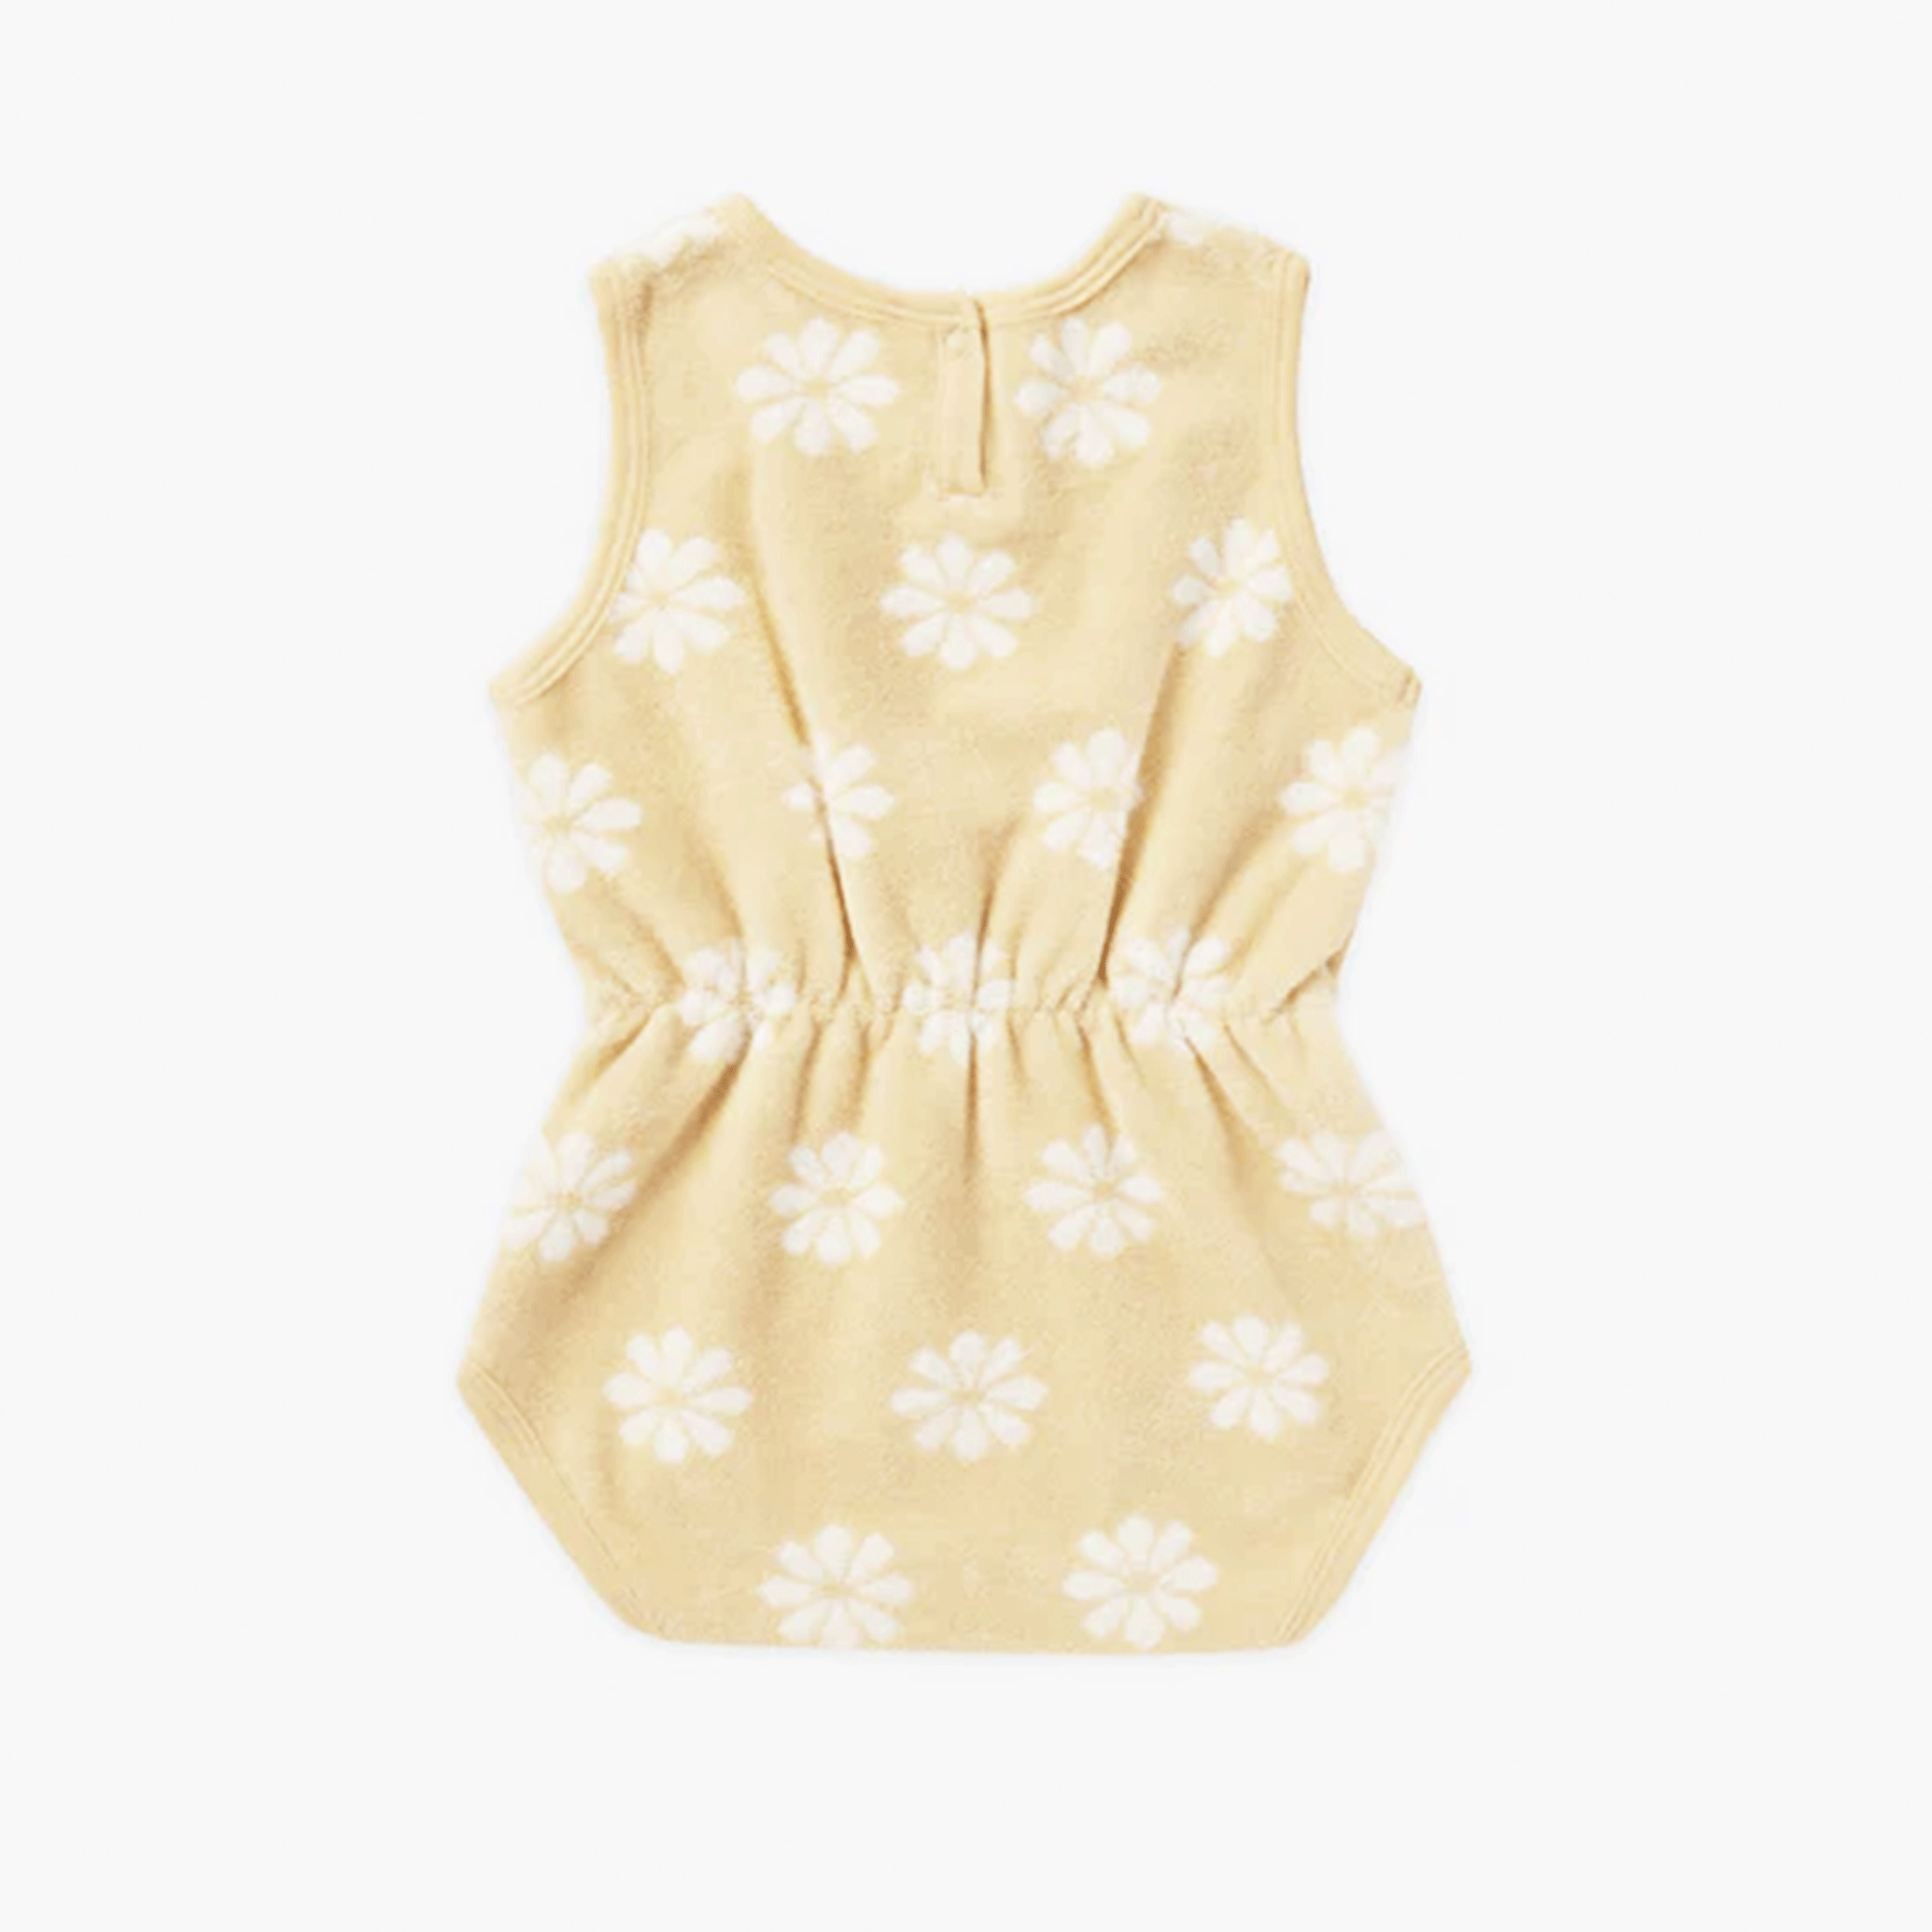 A terry cloth yellow playsuit for babies and toddlers with a white daisy print.